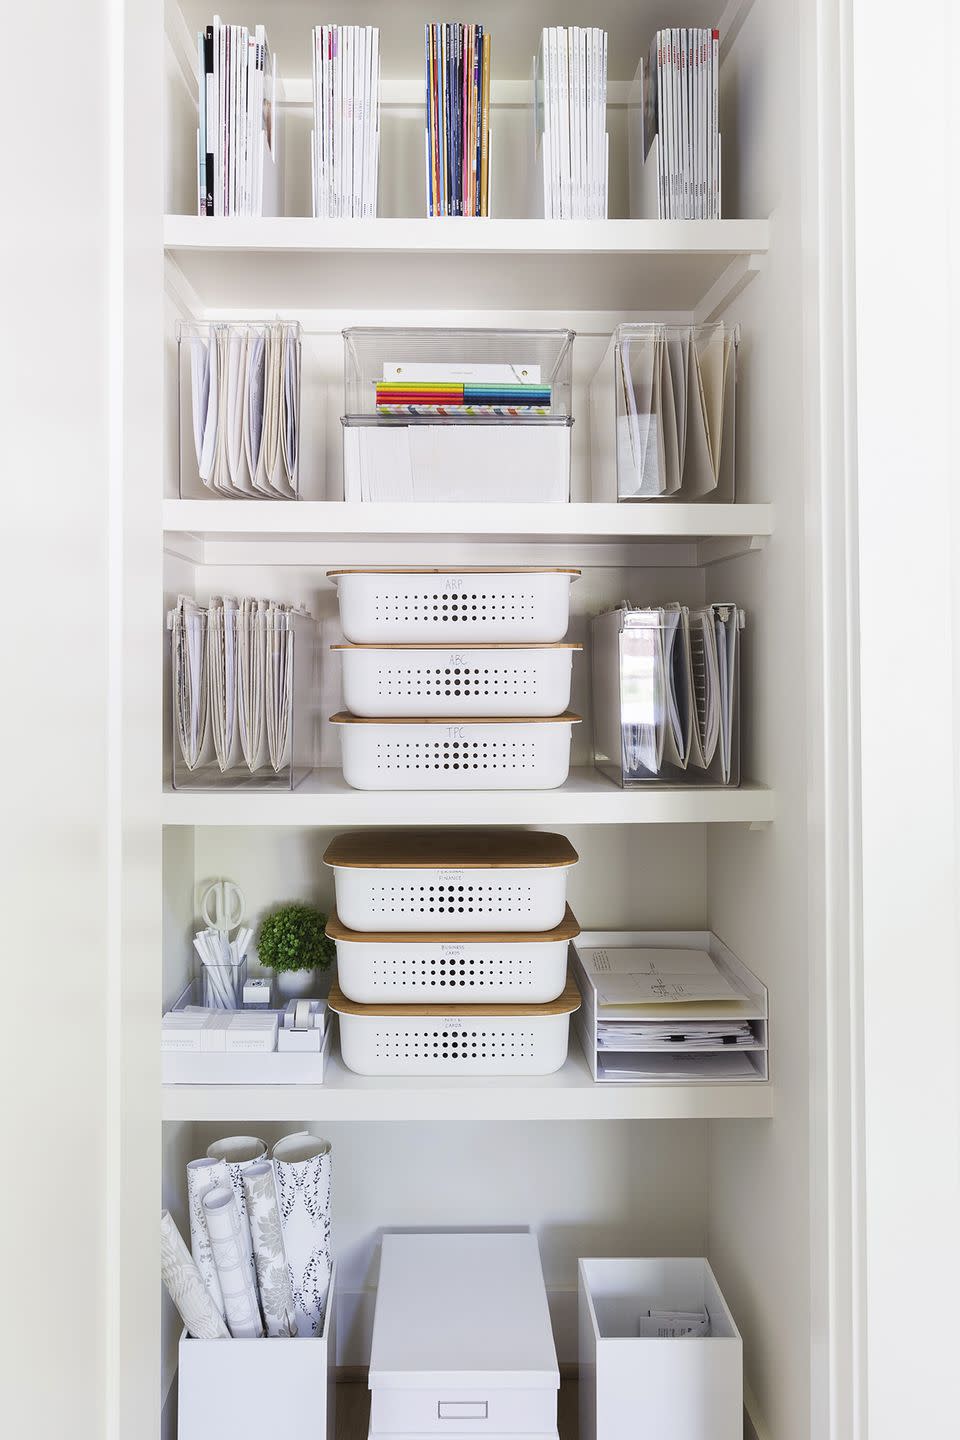 The 100 Best Organizing Tips for the Tidiest Home Ever